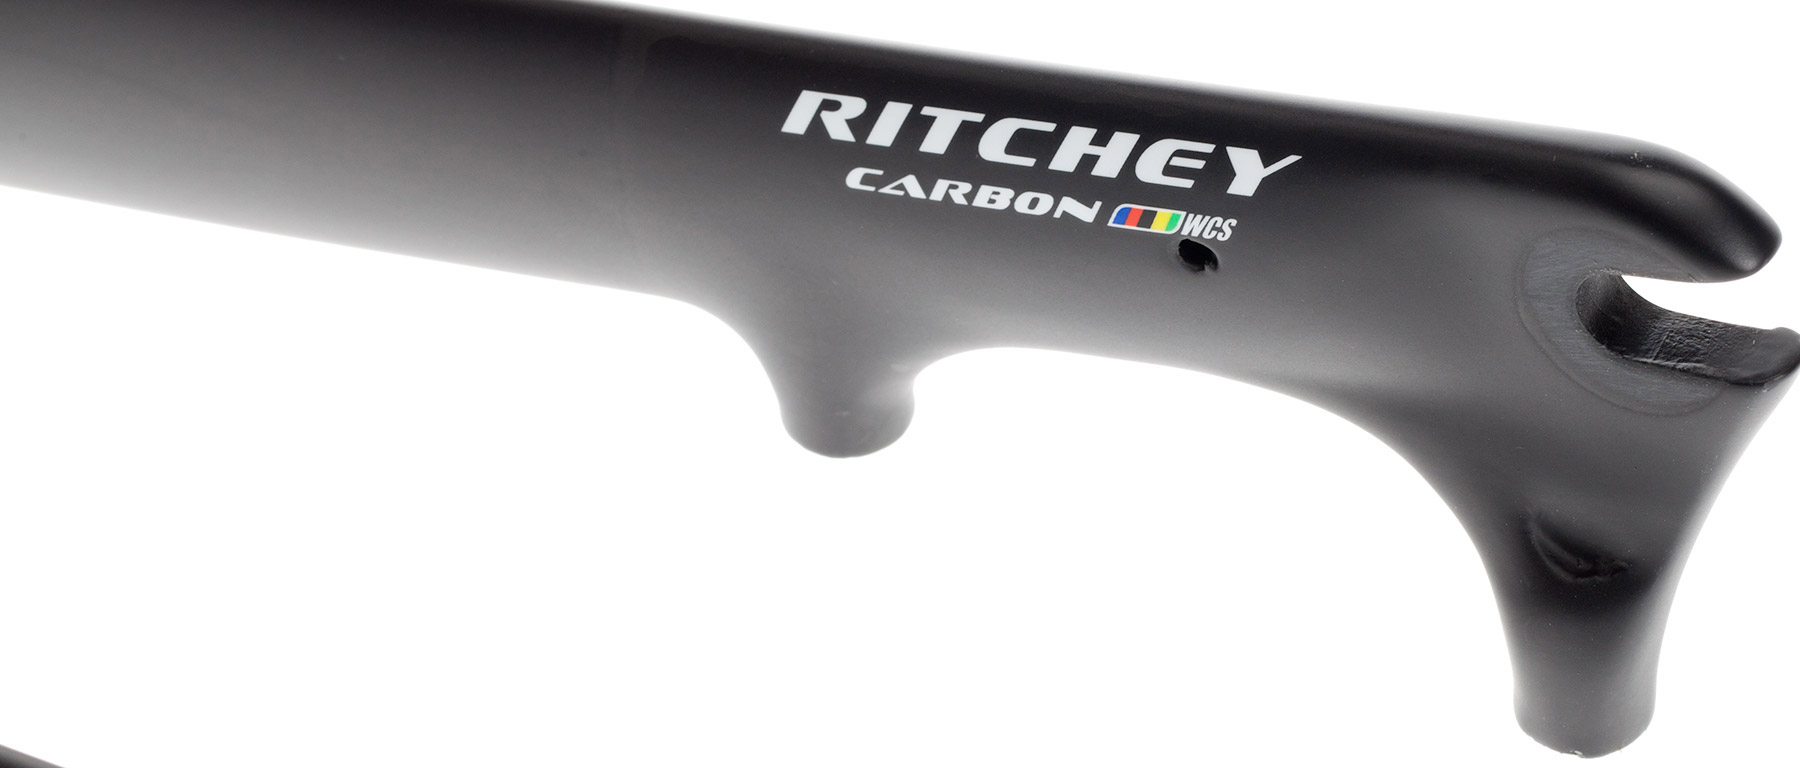 Ritchey Carbon WCS Cyclocross Disc Brake Fork